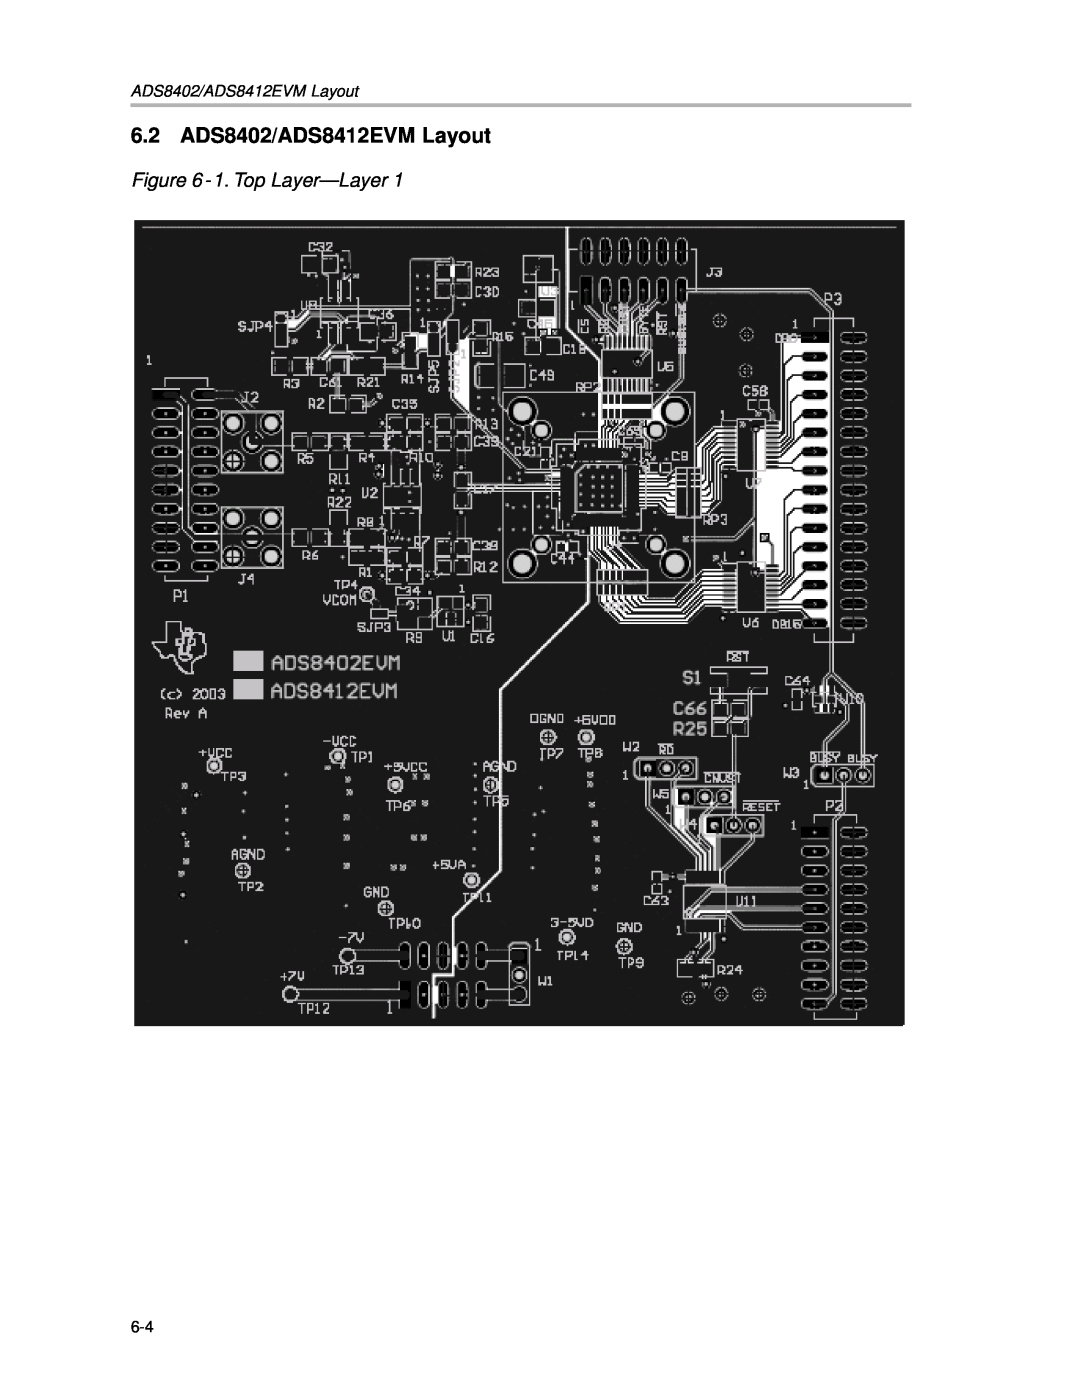 Texas Instruments ADS8402 EVM, ADS8412 EVM manual 6.2 ADS8402/ADS8412EVM Layout, 1. Top Layer-Layer1 